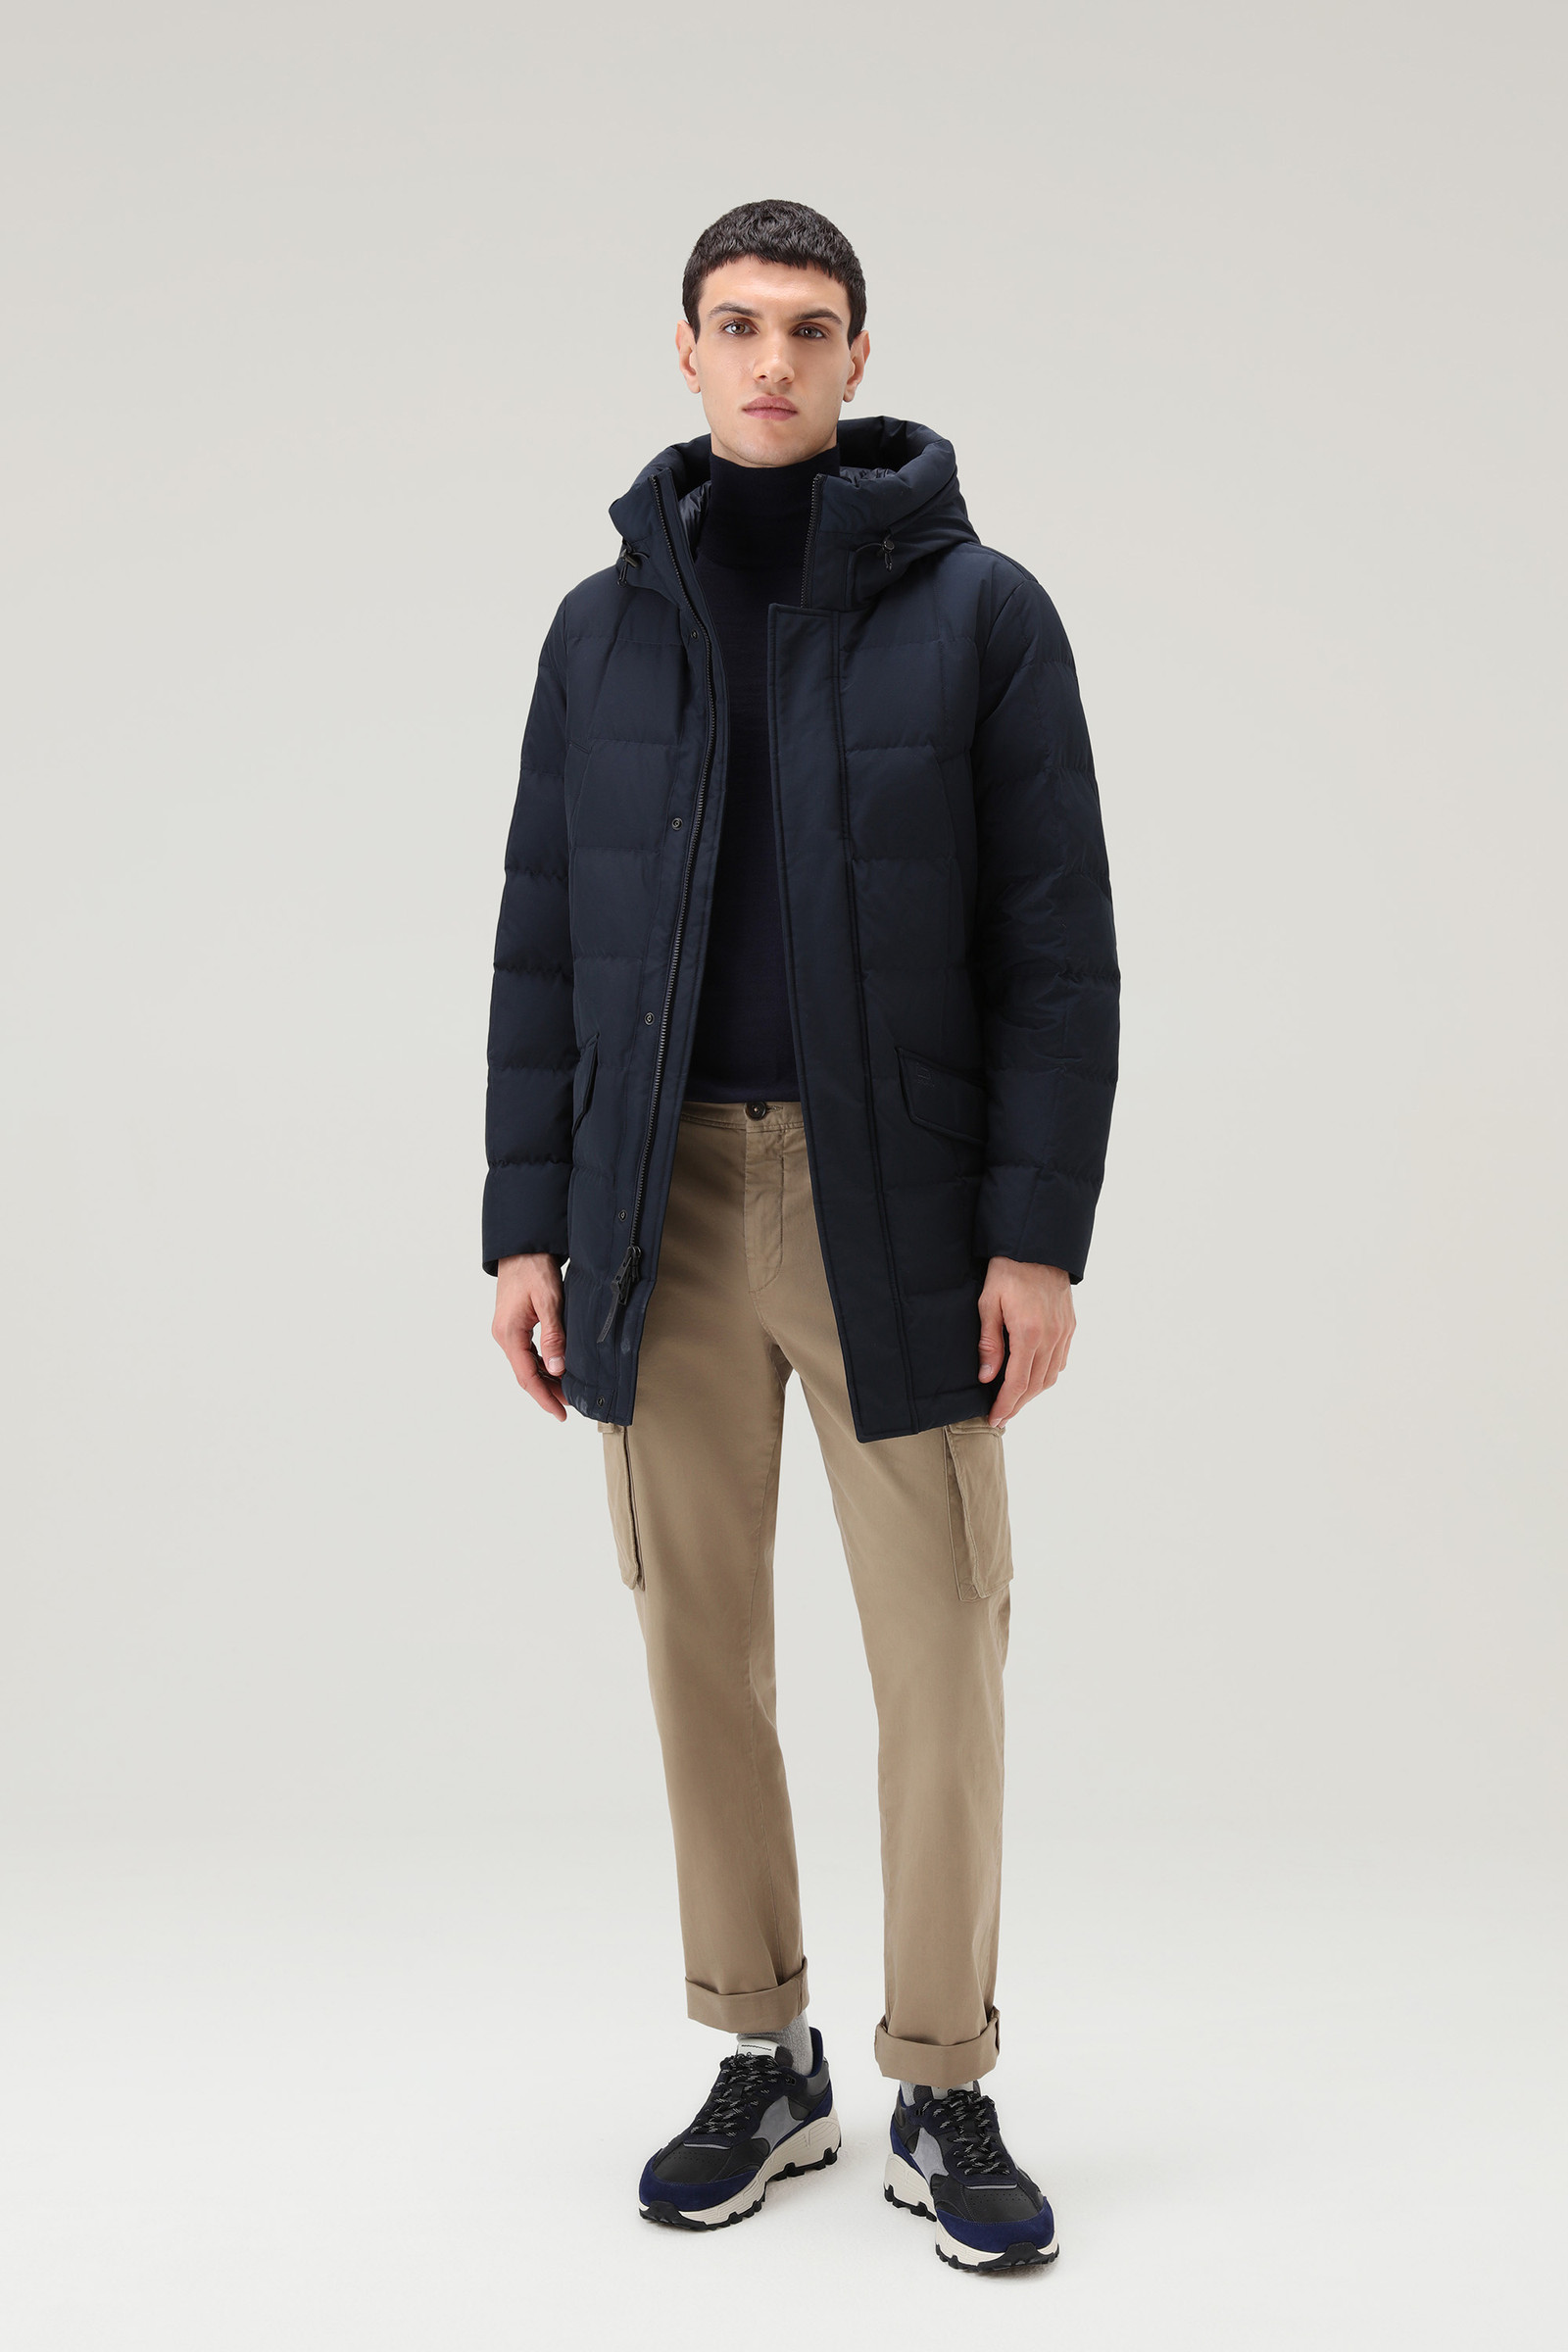 Men's Blizzard Parka in Ramar Cloth with Square Quilting Blue | Woolrich UK